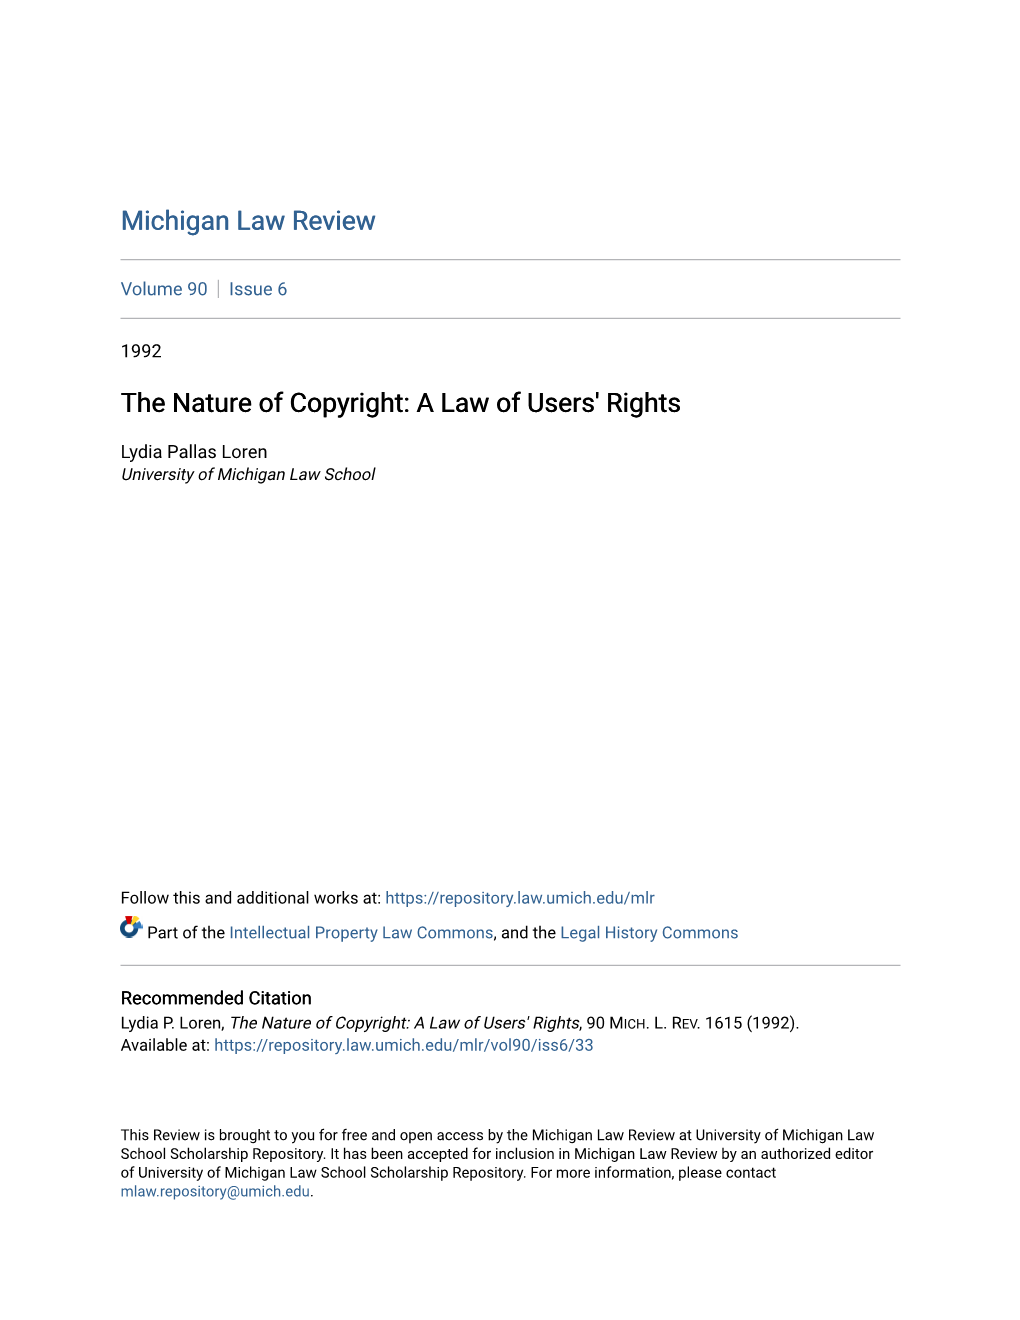 The Nature of Copyright: a Law of Users' Rights